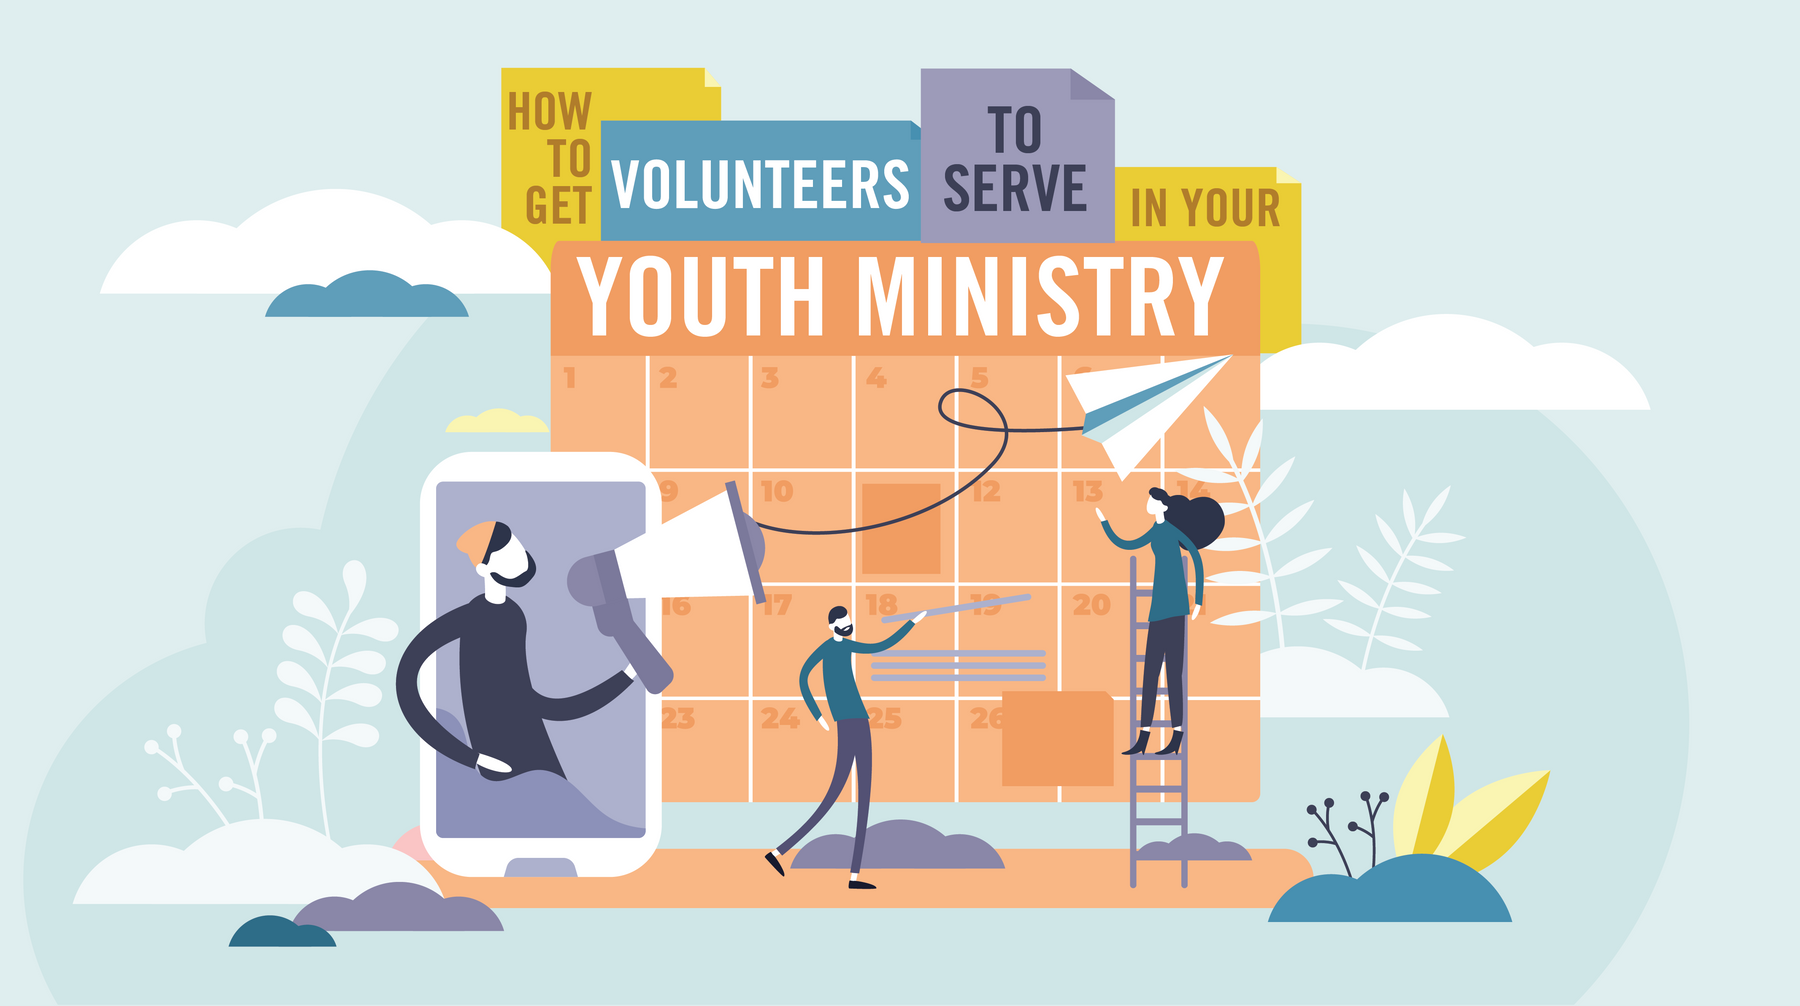 How to Get Volunteers to Serve in Your Youth Ministry